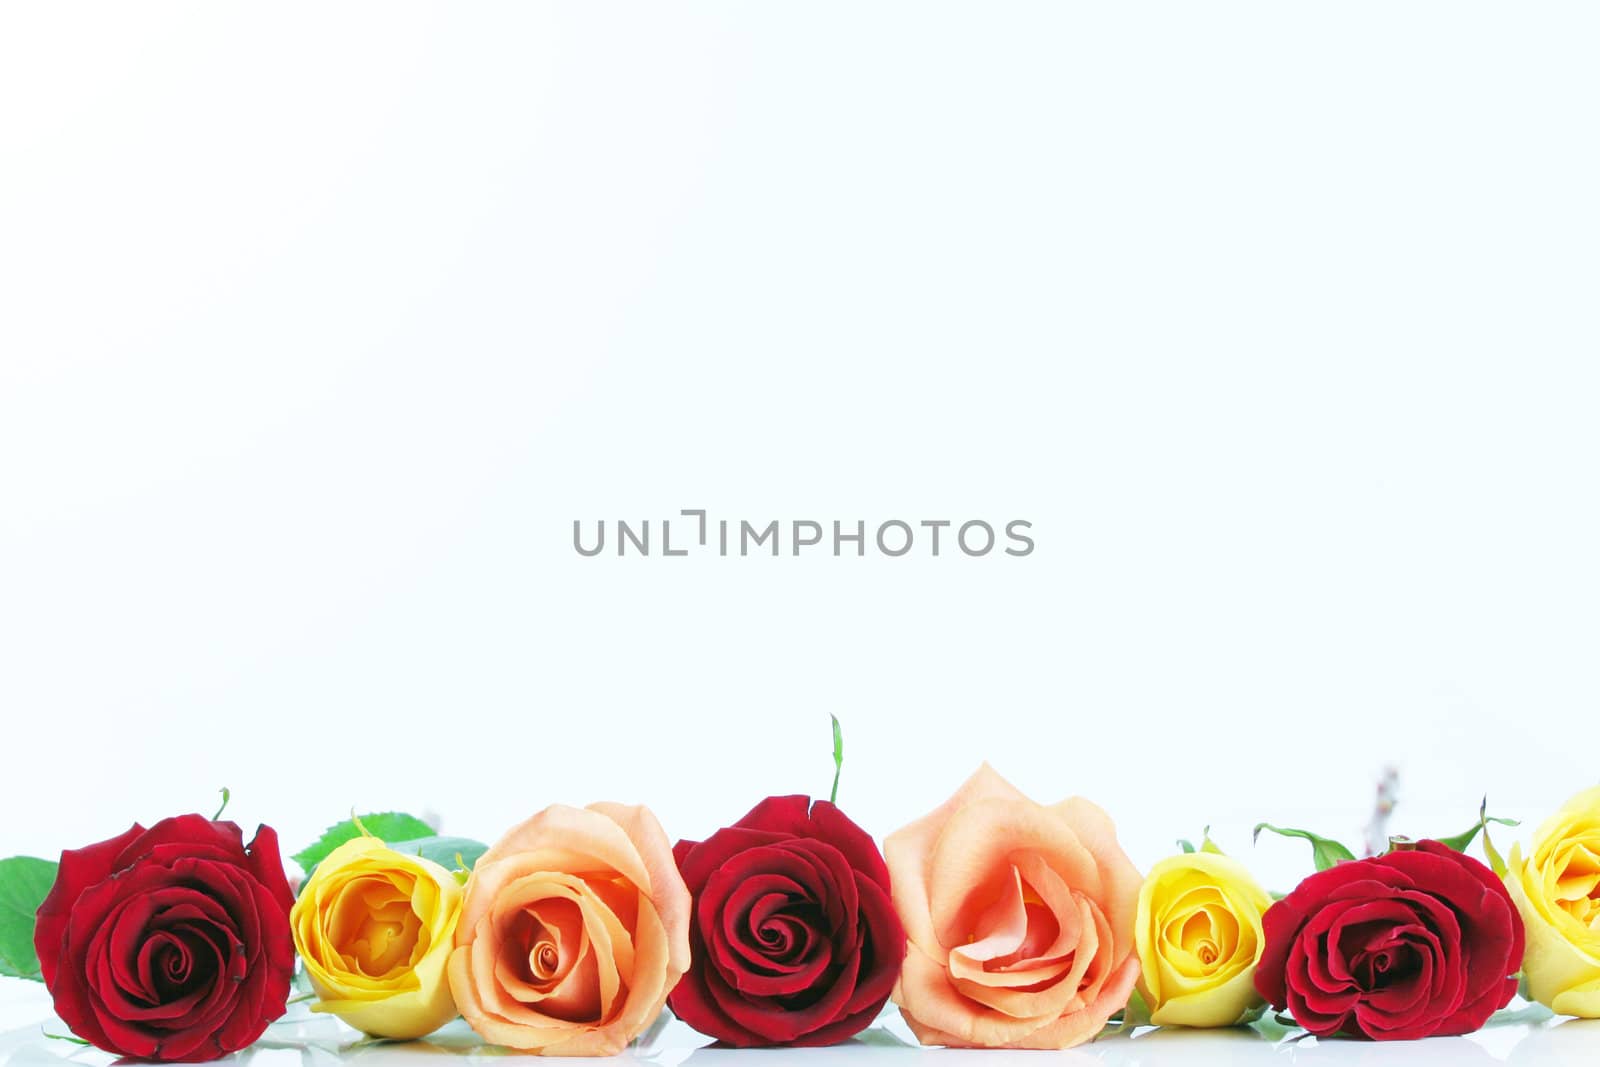 Red, yellow and peach color roses  by jarenwicklund